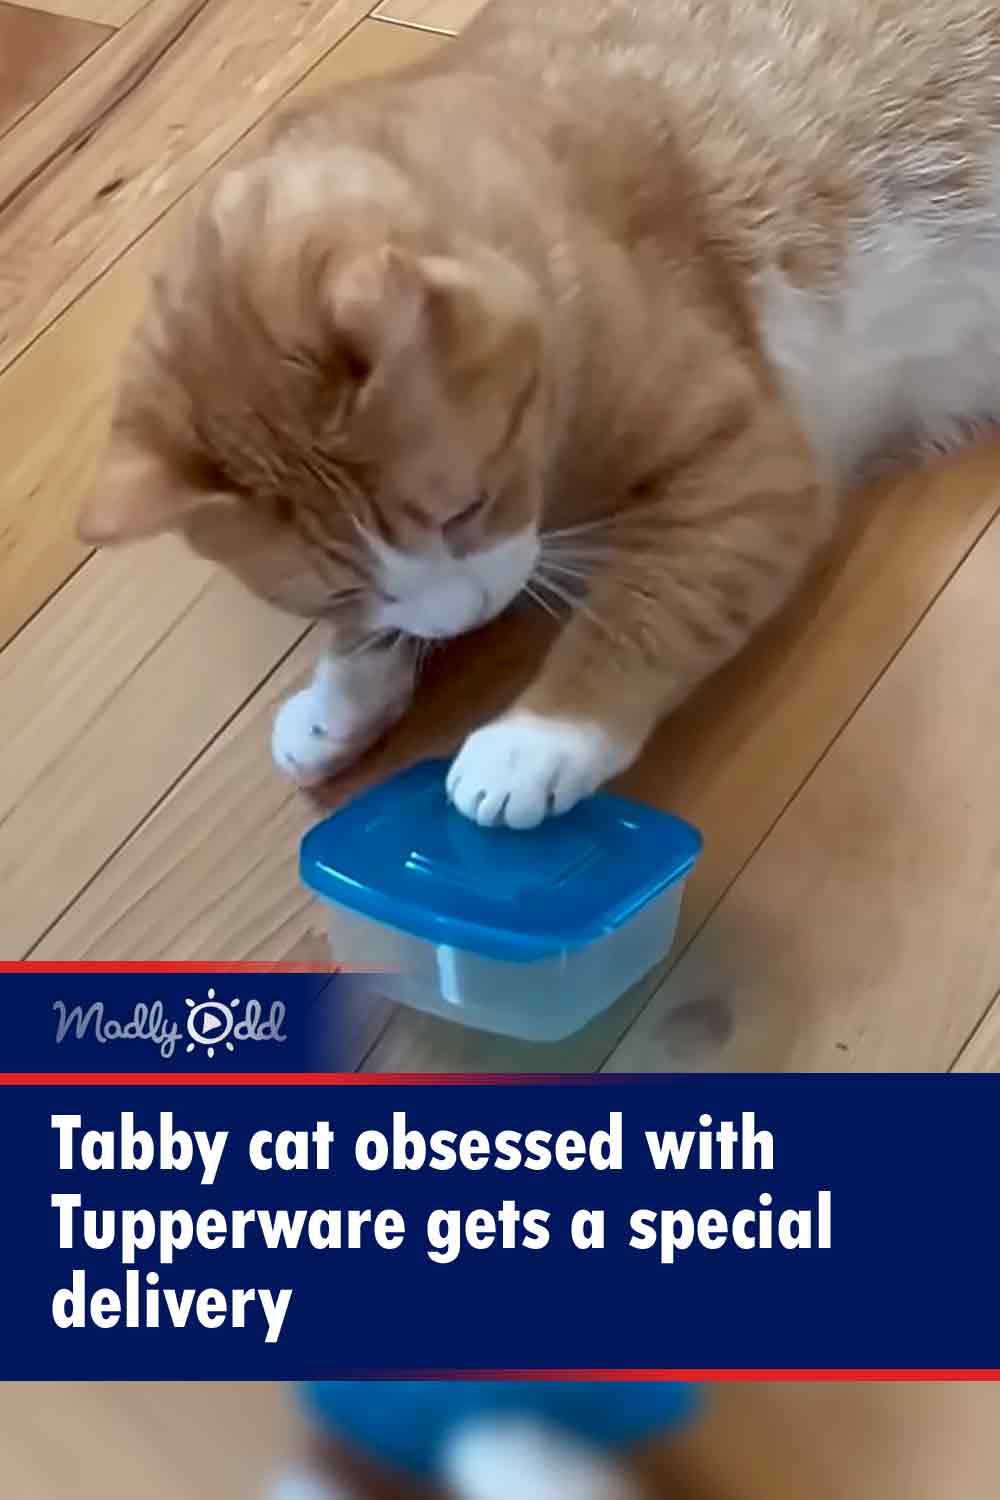 Tabby cat obsessed with Tupperware gets a special delivery